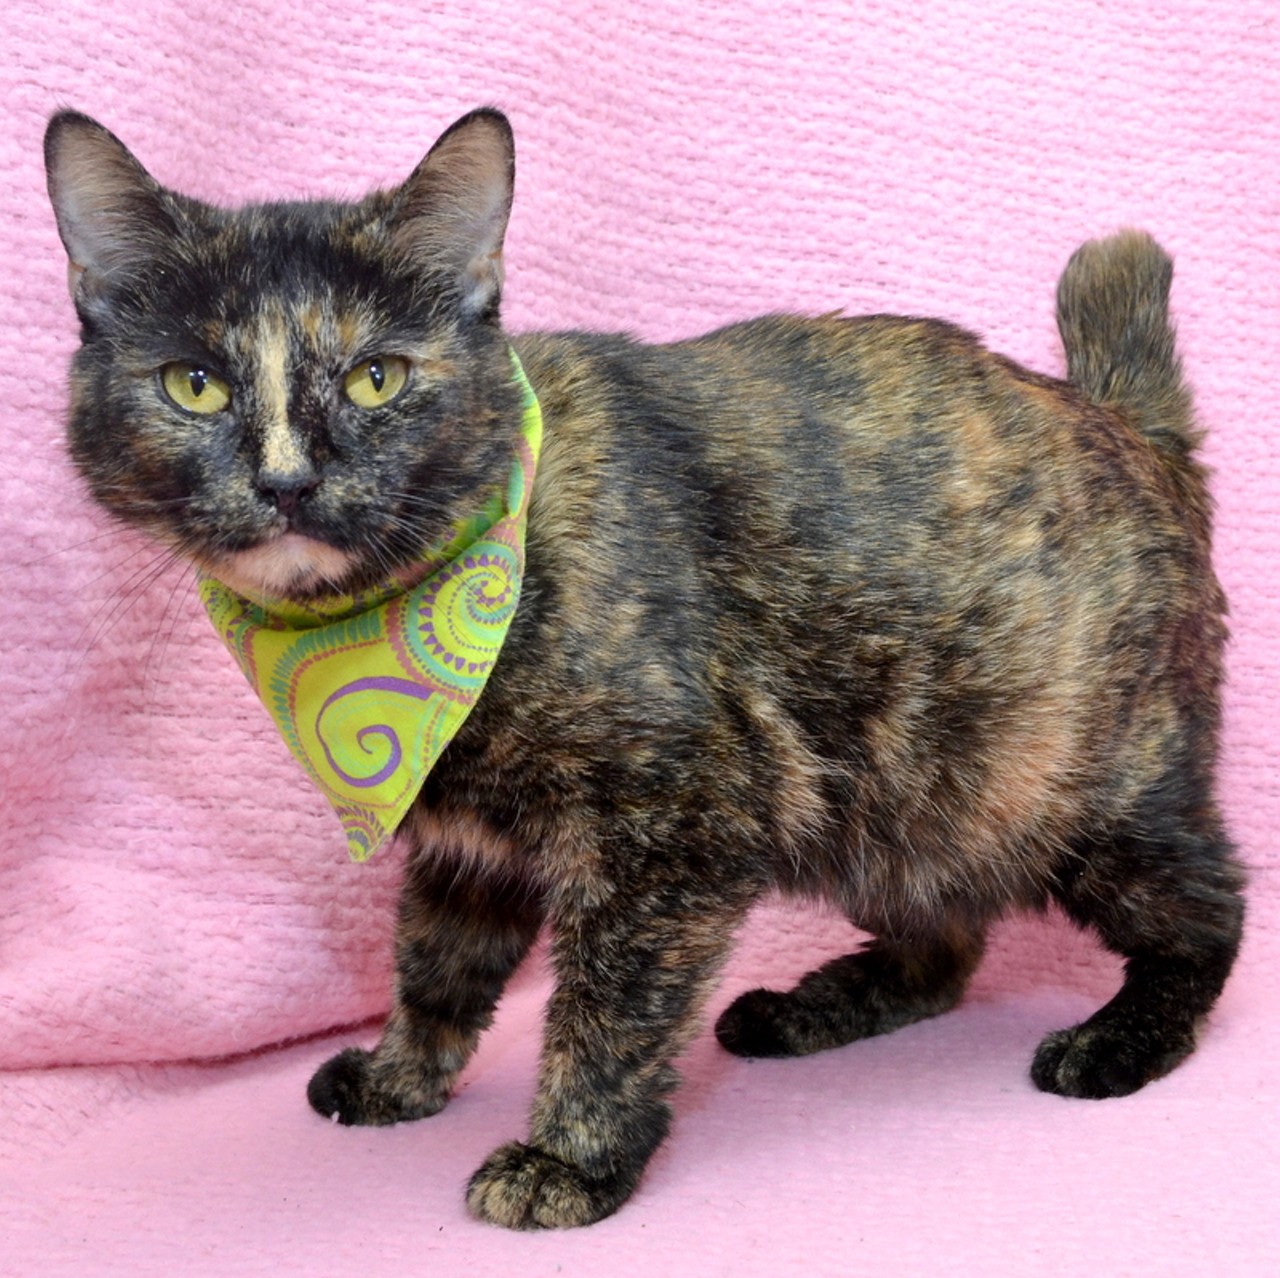 NAME: Tortie 
GENDER: Female 
BREED: Domestic Short Hair 
AGE: 5 years, 3 months 
WEIGHT: 9 pounds
SPECIAL CONSIDERATIONS: Tortie would prefer to be your only cat.
REASON I CAME TO MHS: Owner surrender 
LOCATION: Berman Center for Animal Care in Westland 
ID NUMBER: 866917 